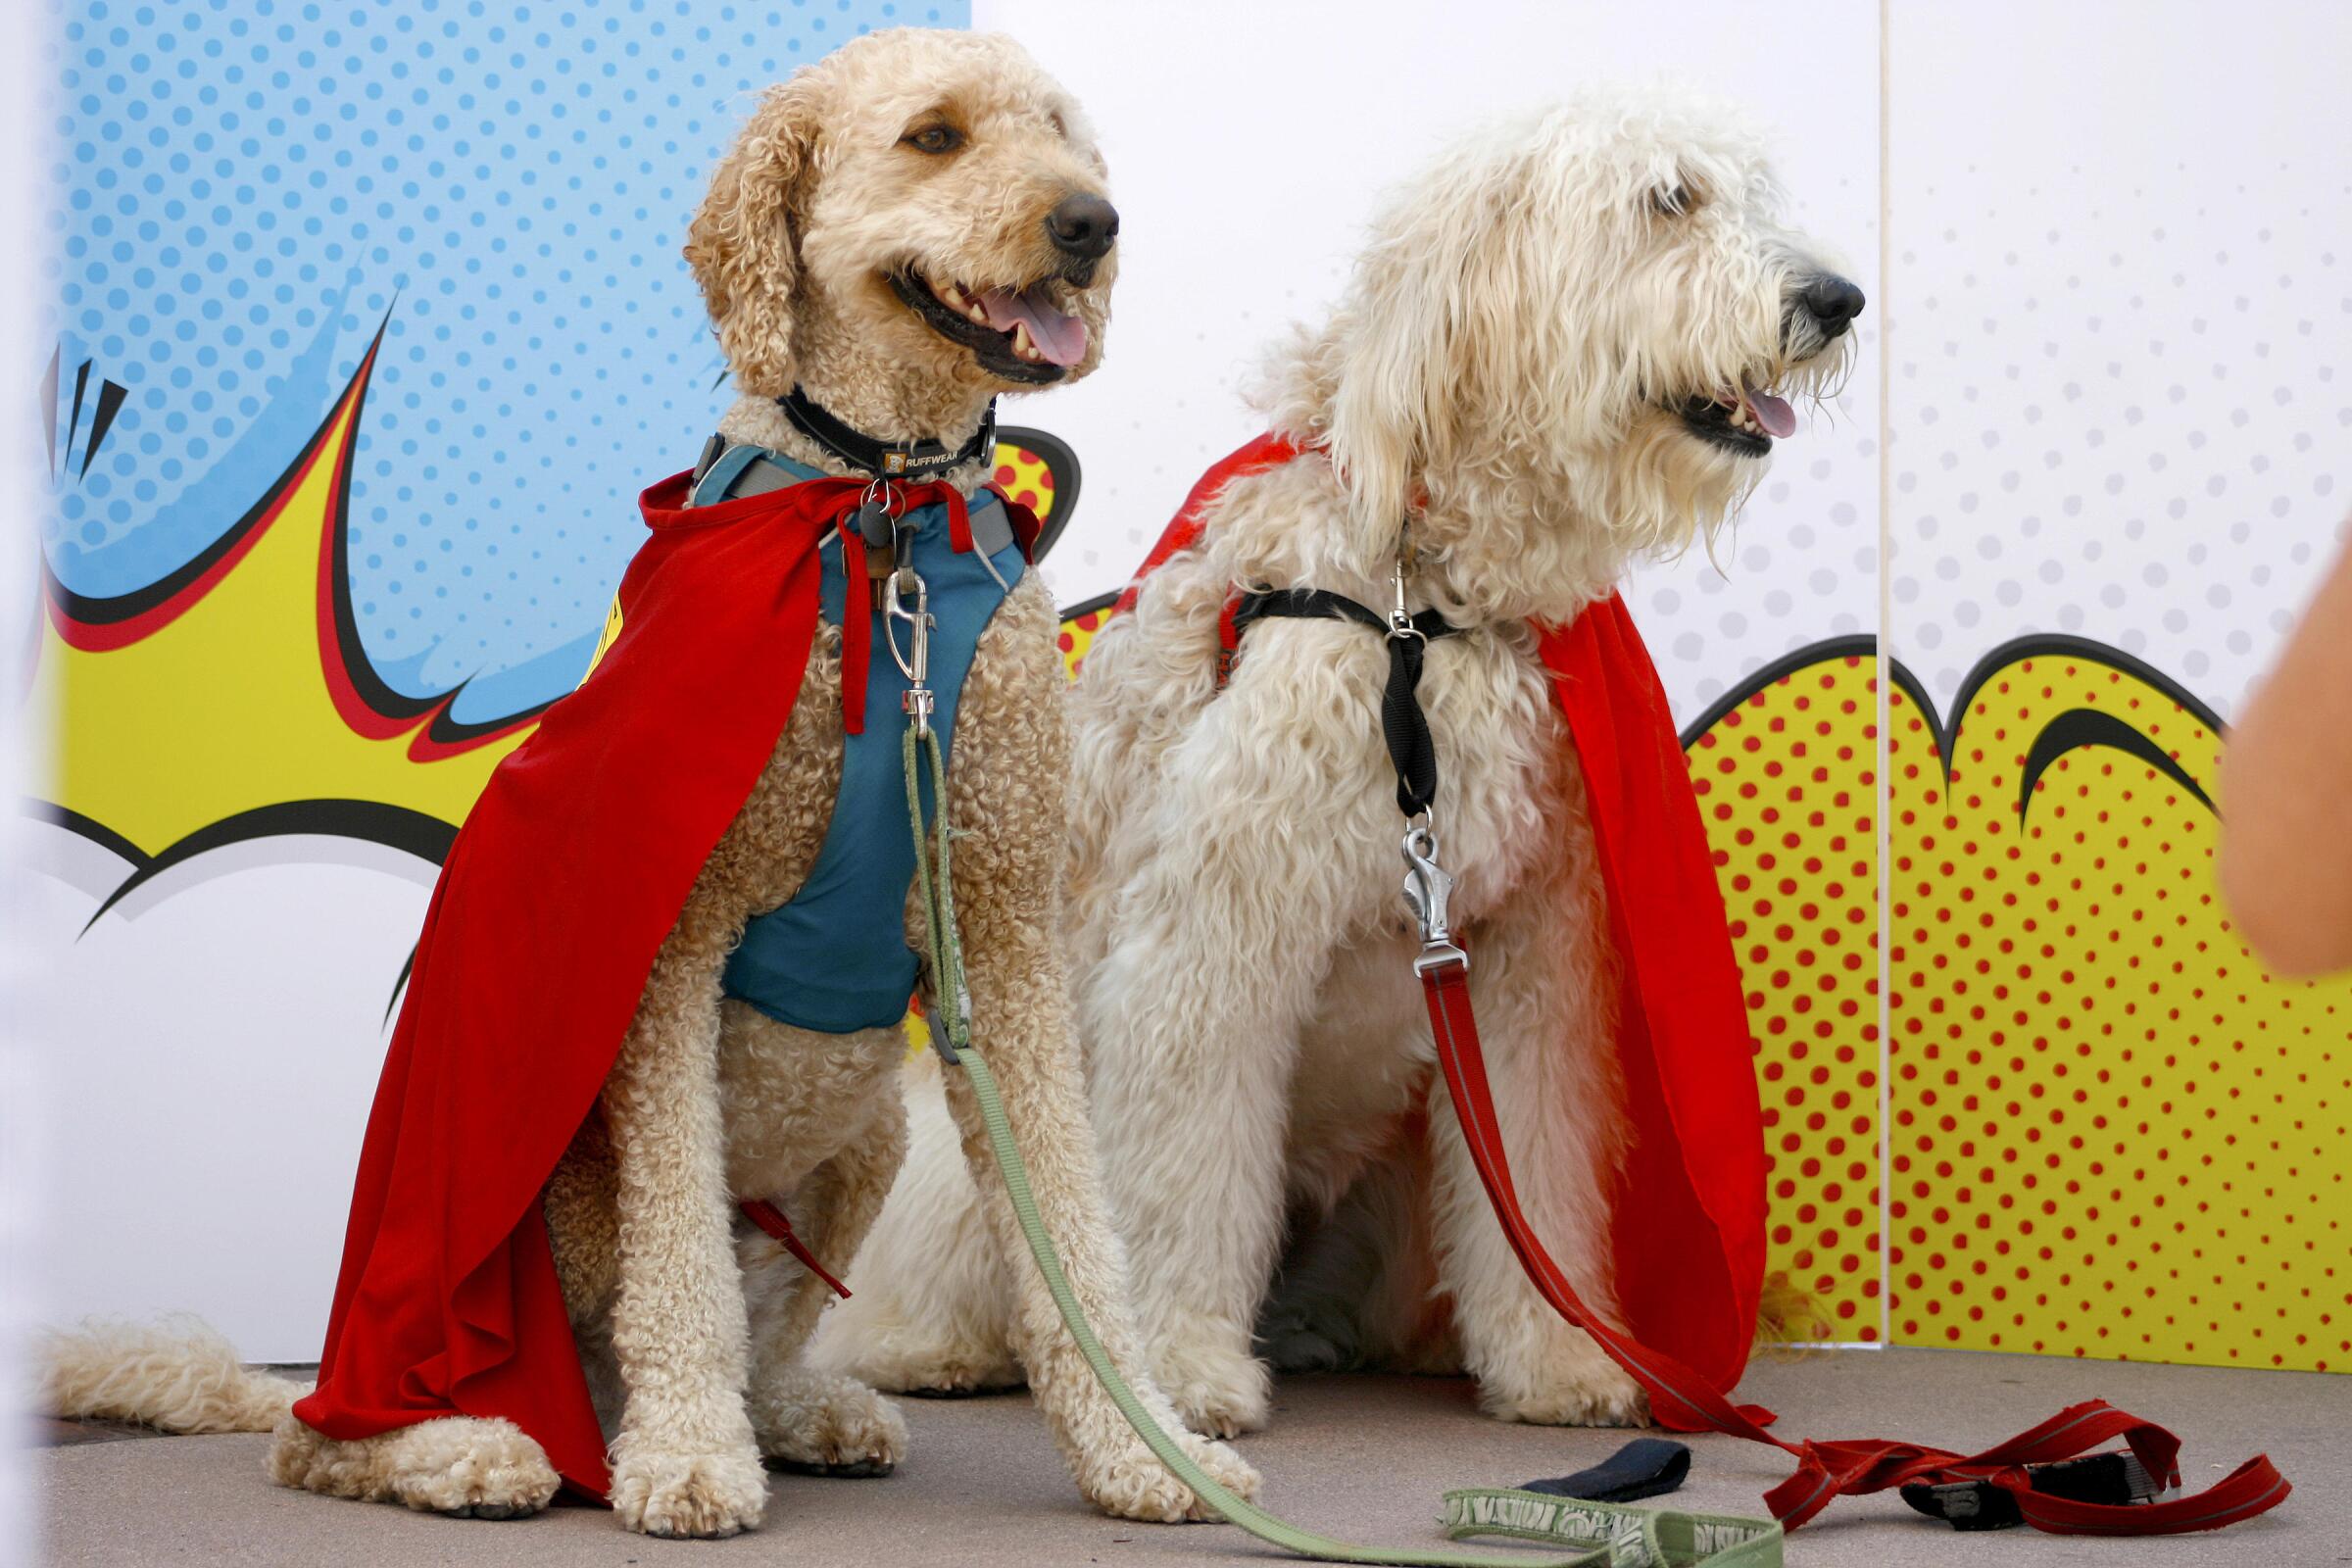 Two dogs dressed up as superheroes at PAWmicon